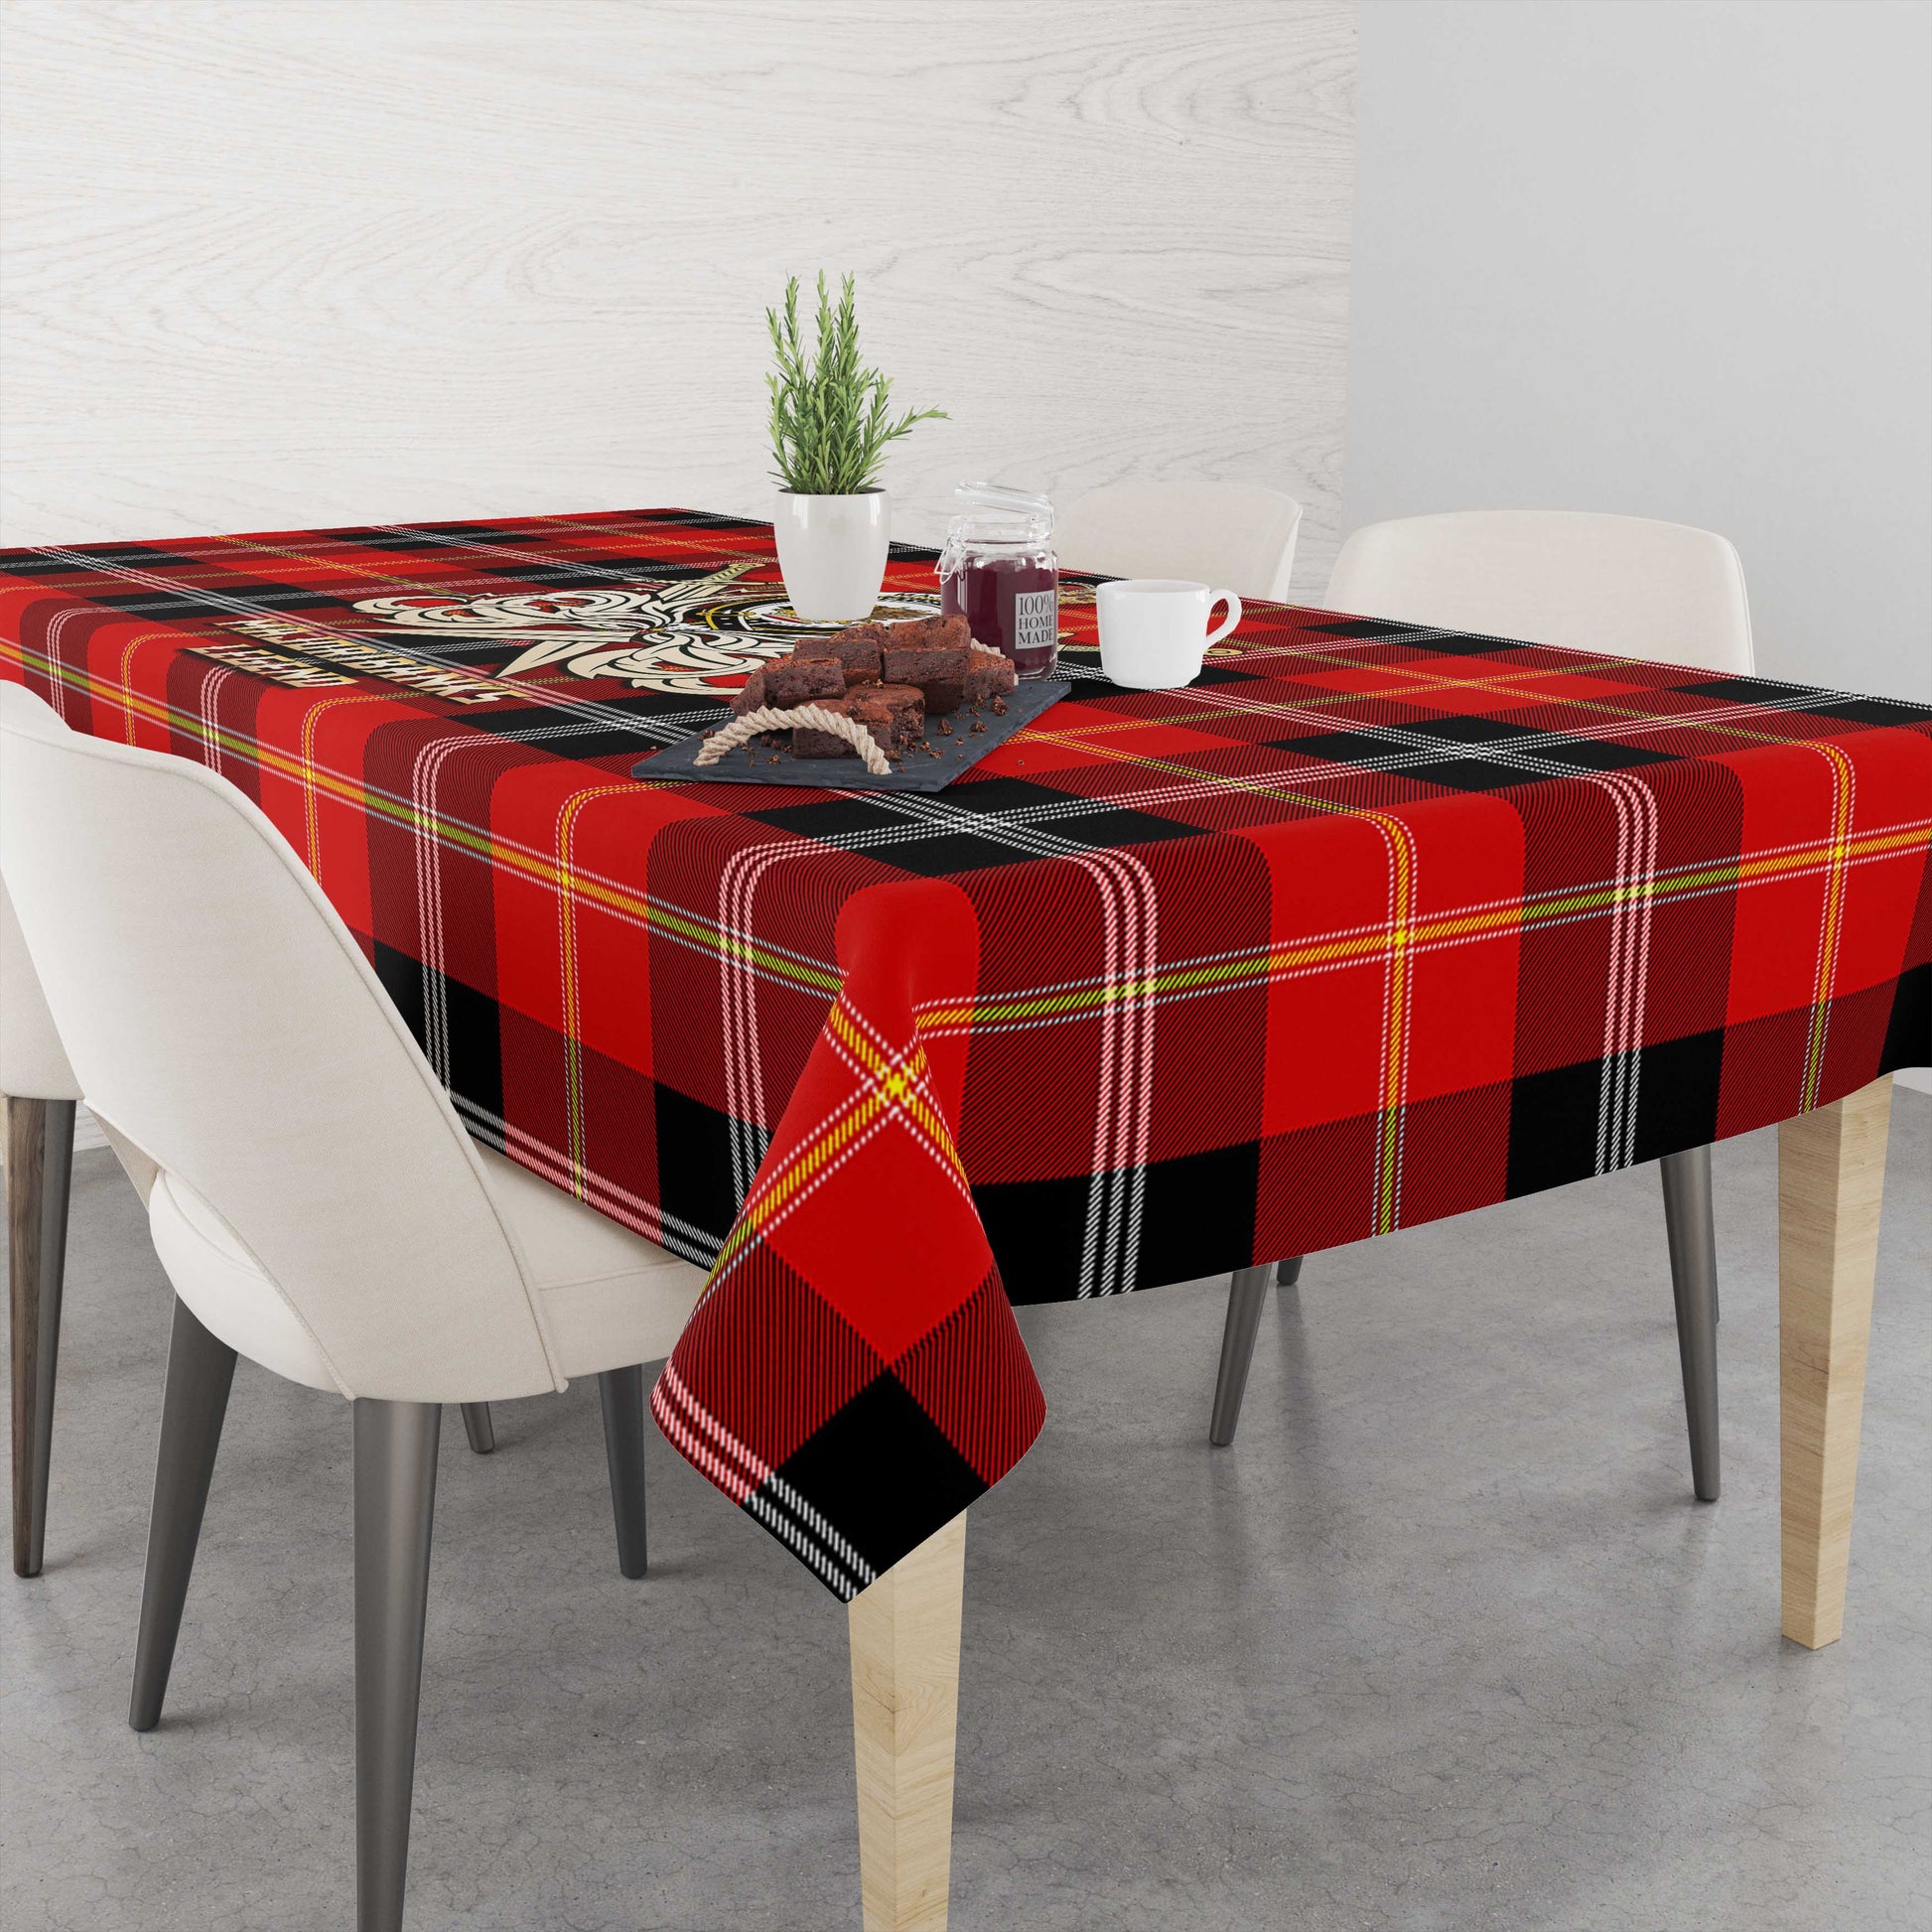 Tartan Vibes Clothing Majoribanks Tartan Tablecloth with Clan Crest and the Golden Sword of Courageous Legacy